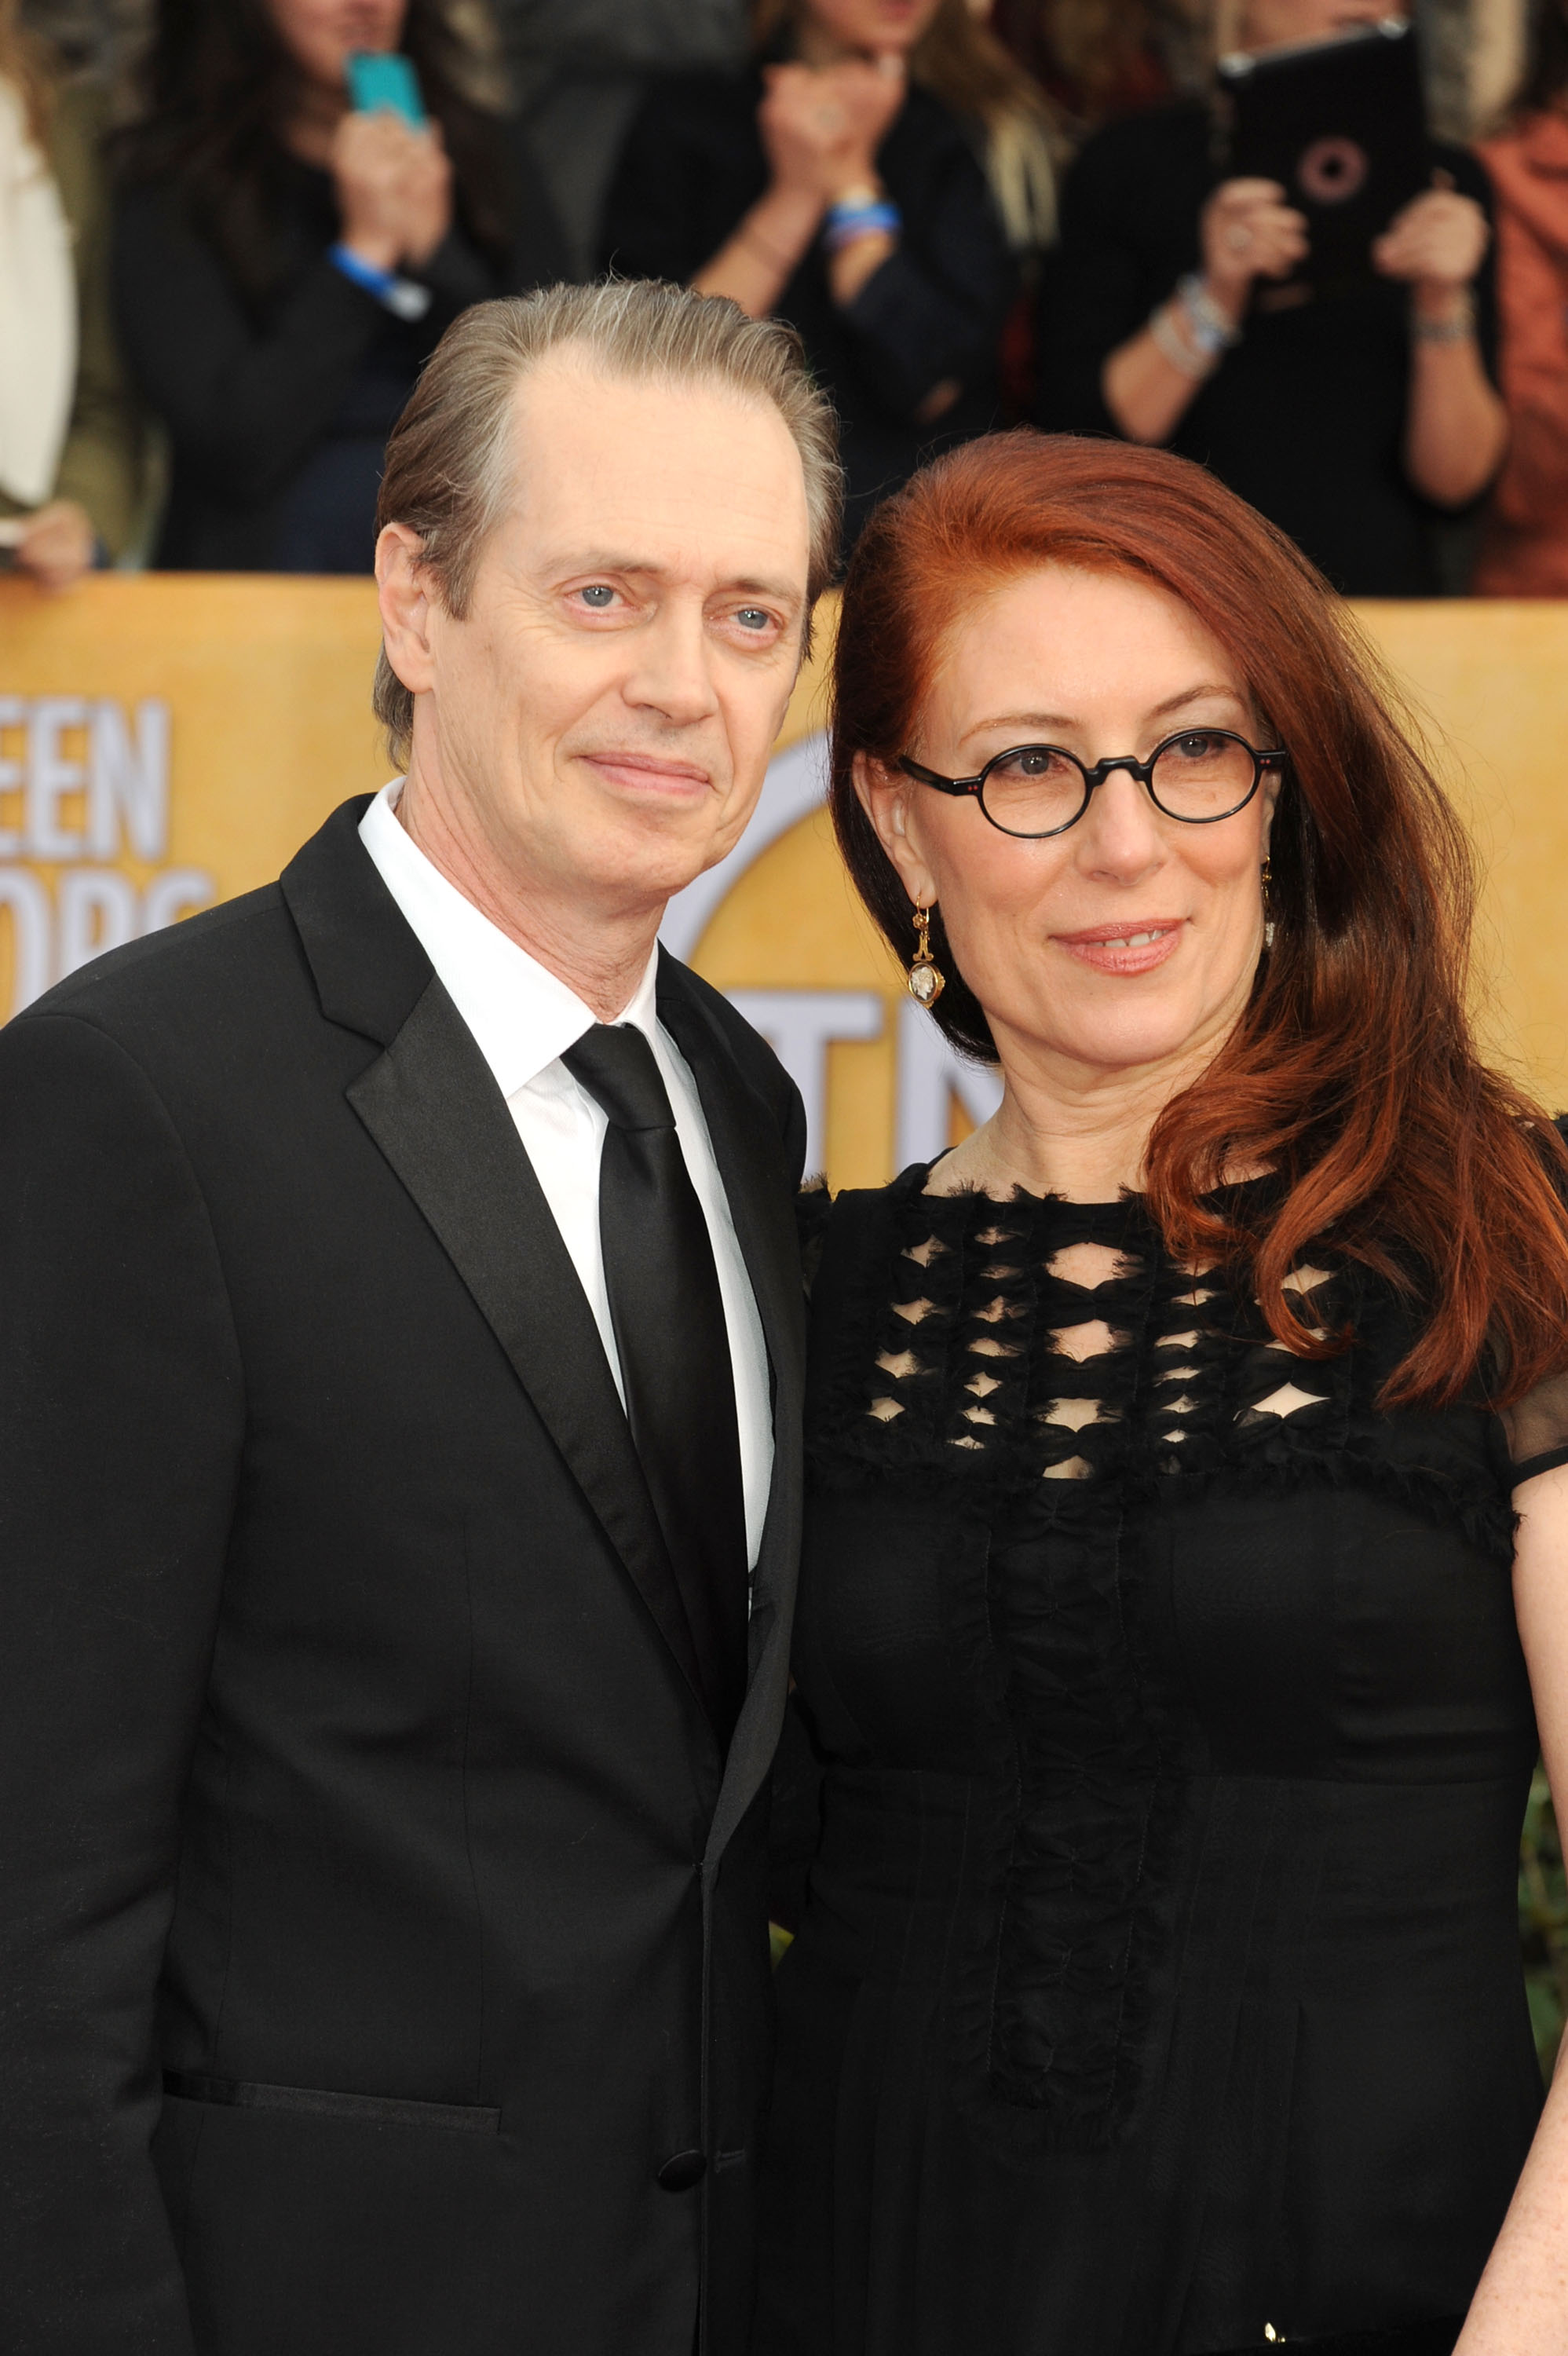 Actor Steve Buscemi and wife arrives at the 19th Annual Screen Actors Guild Awards held at The Shrine Auditorium on January 27, 2013 in Los Angeles, California. | Source: Getty Images